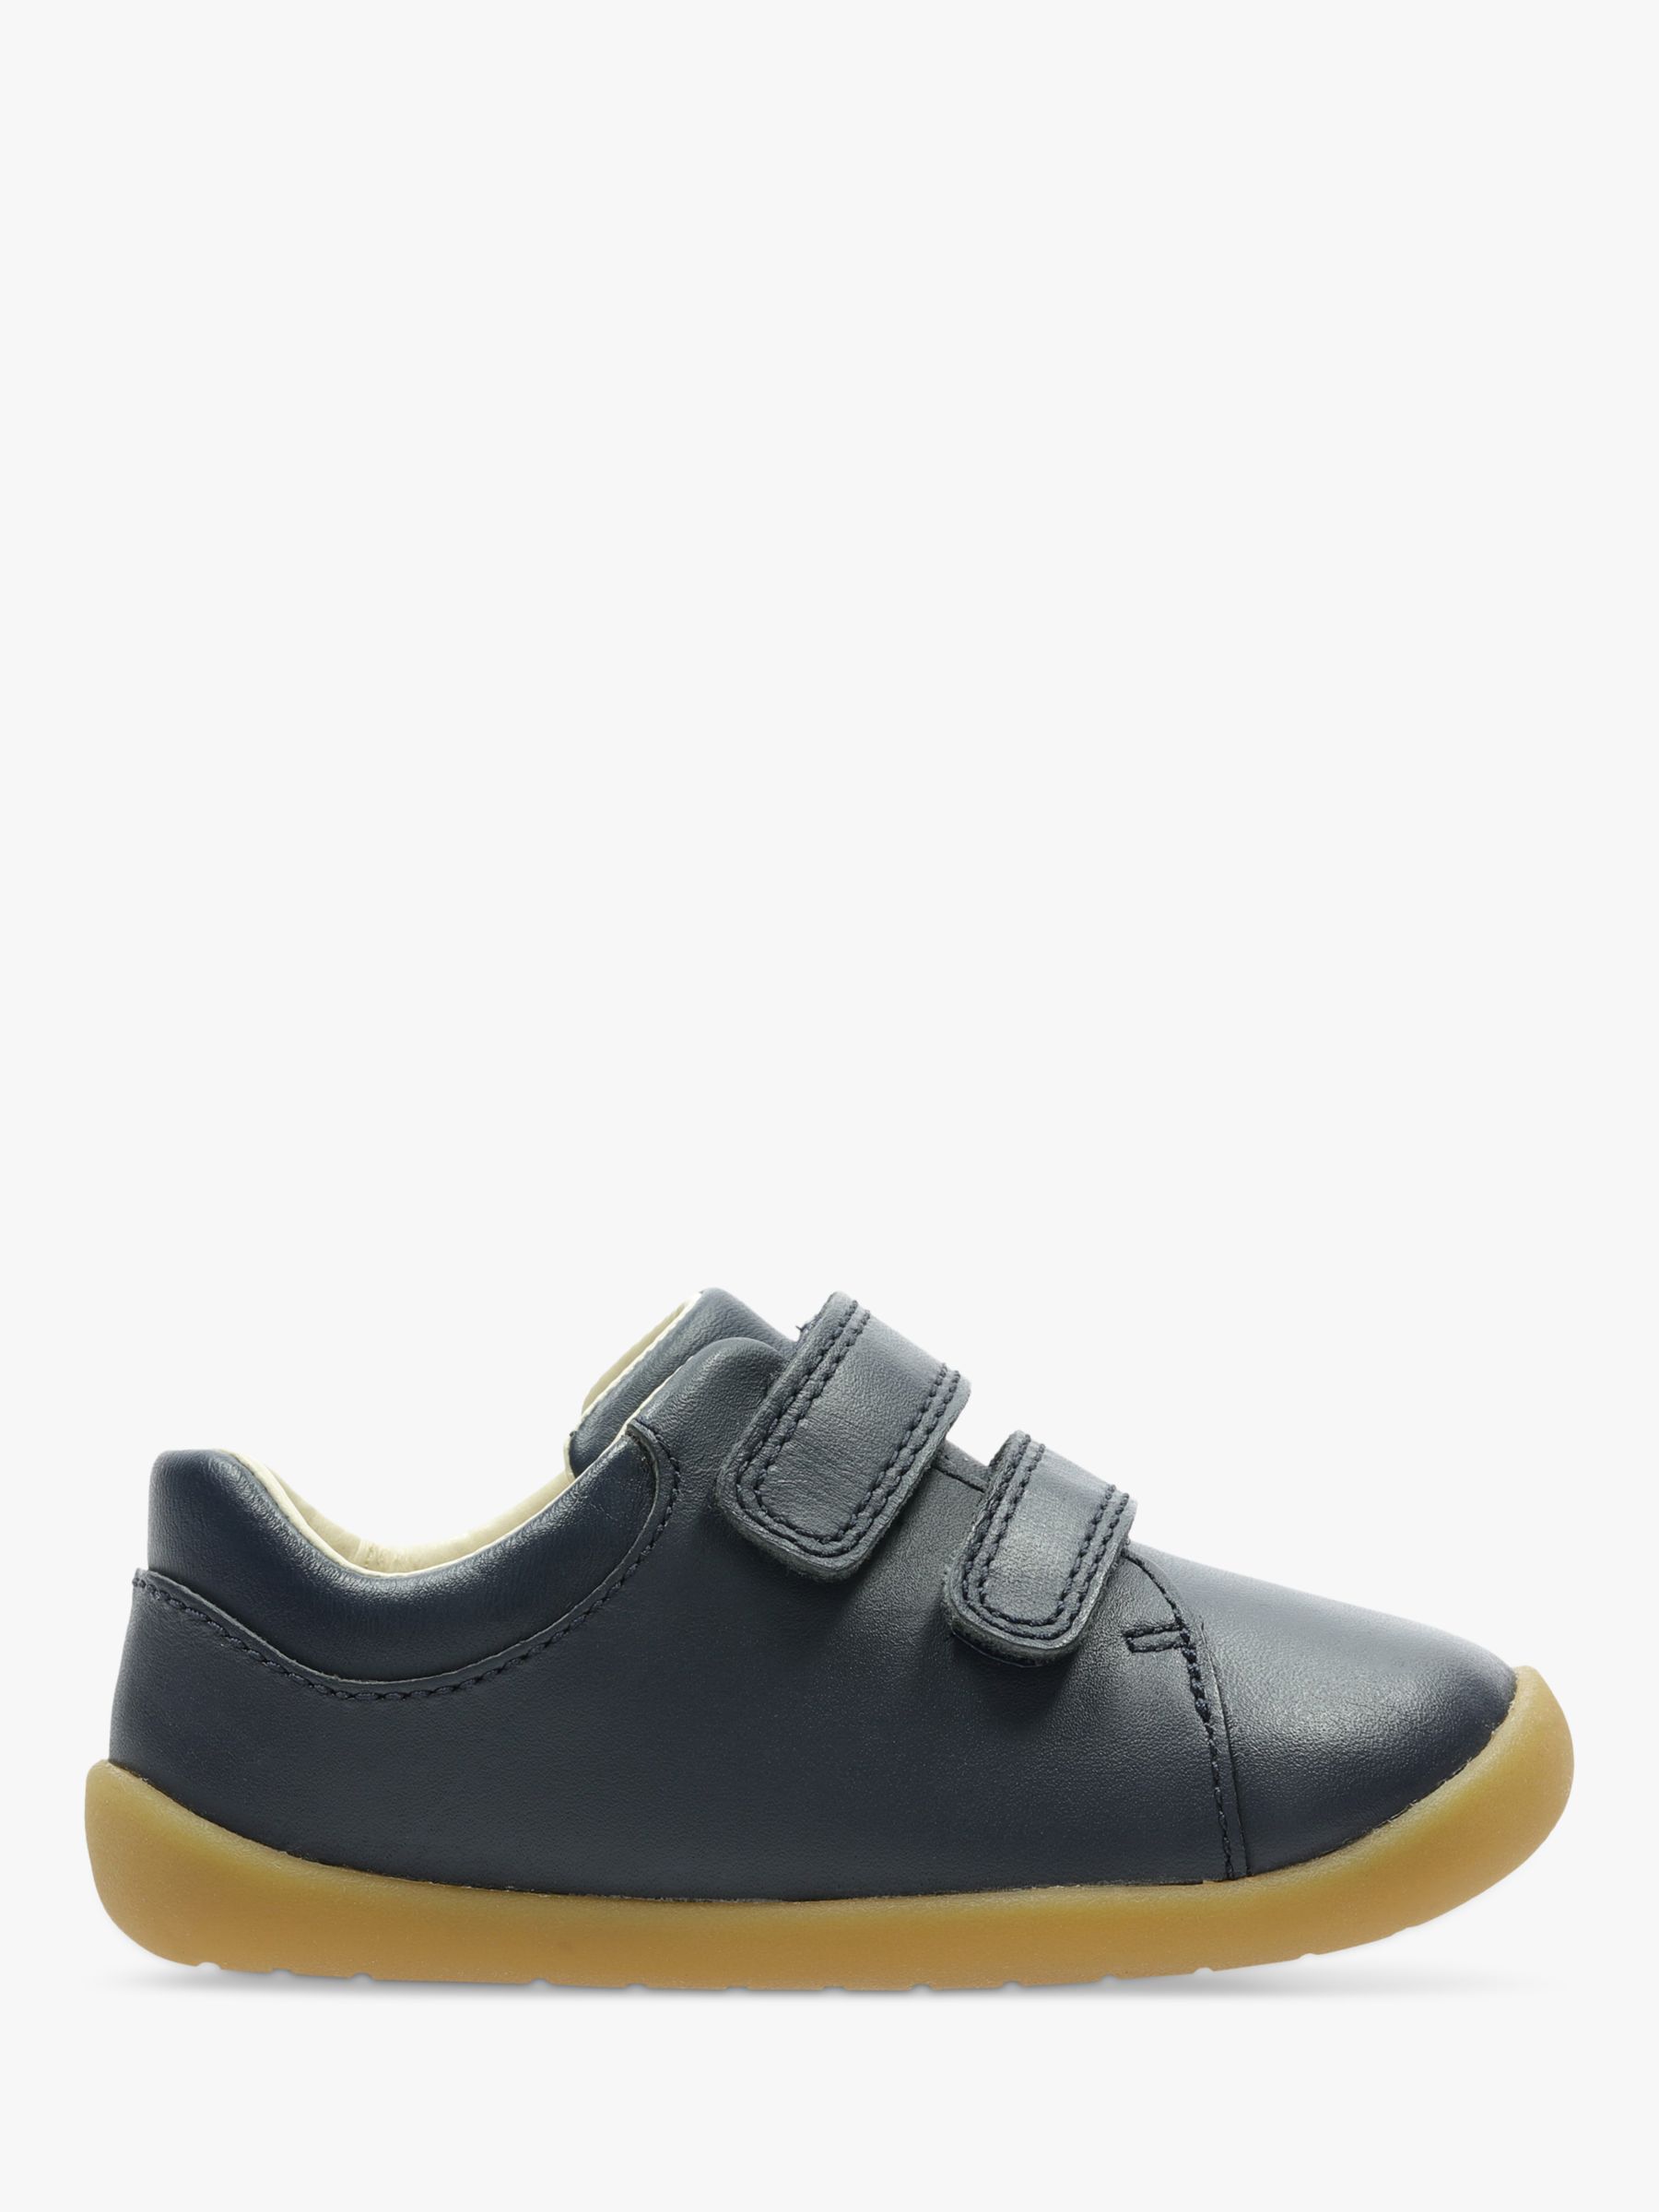 clarks baby shoes canada